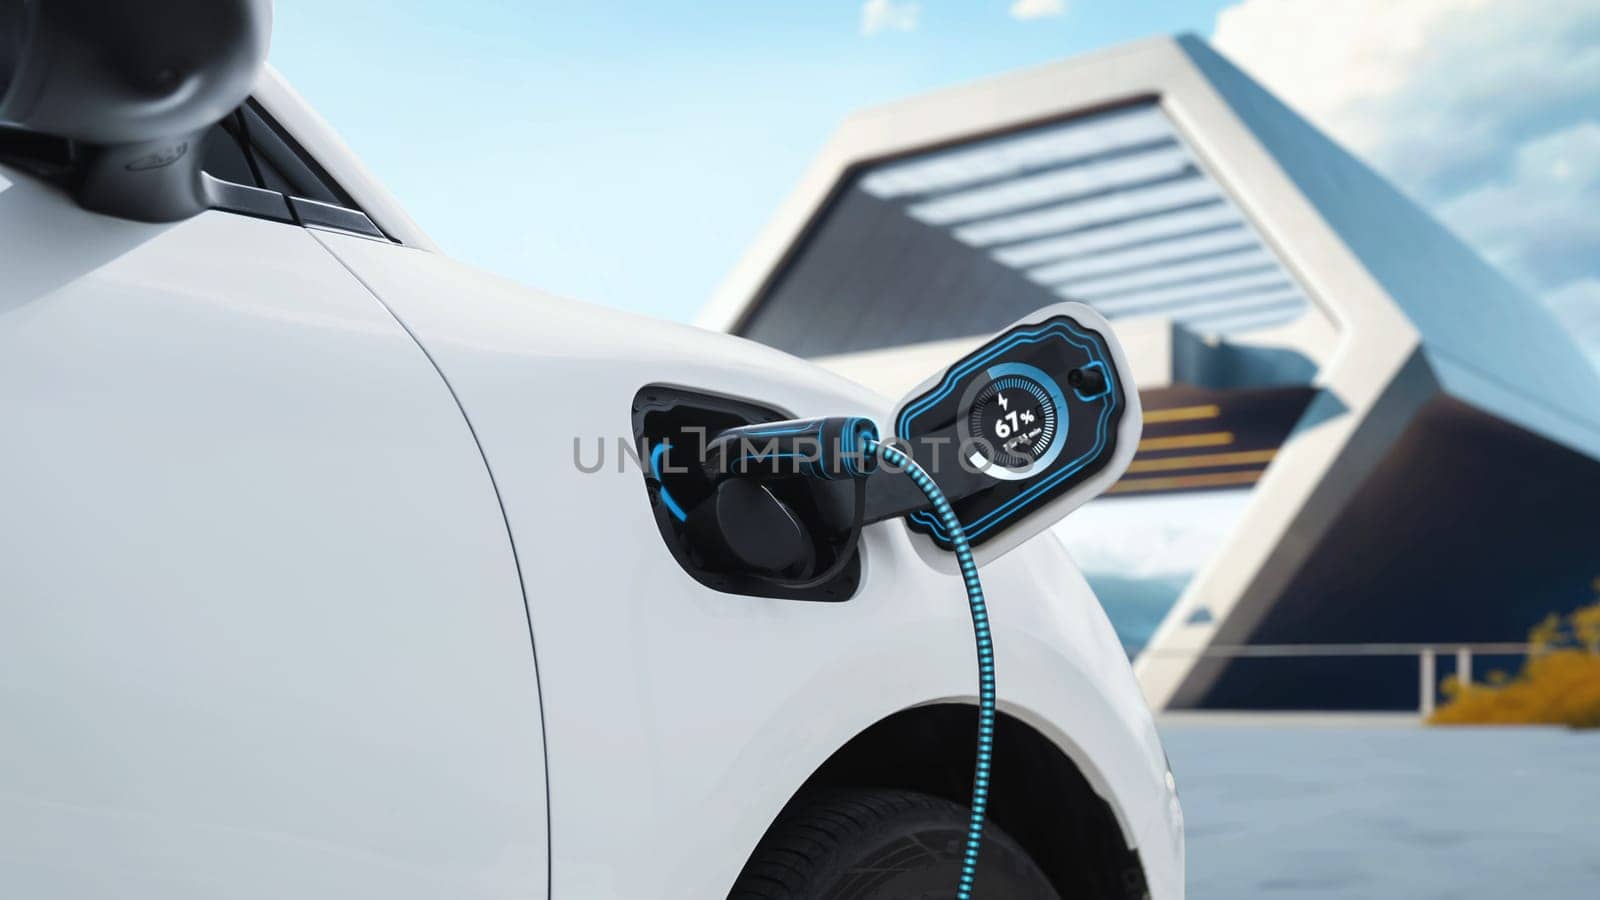 Electric car recharging from charging station display smart digital battery status hologram. Technological advancement rechargeable EV car using alternative and sustainable energy. Peruse